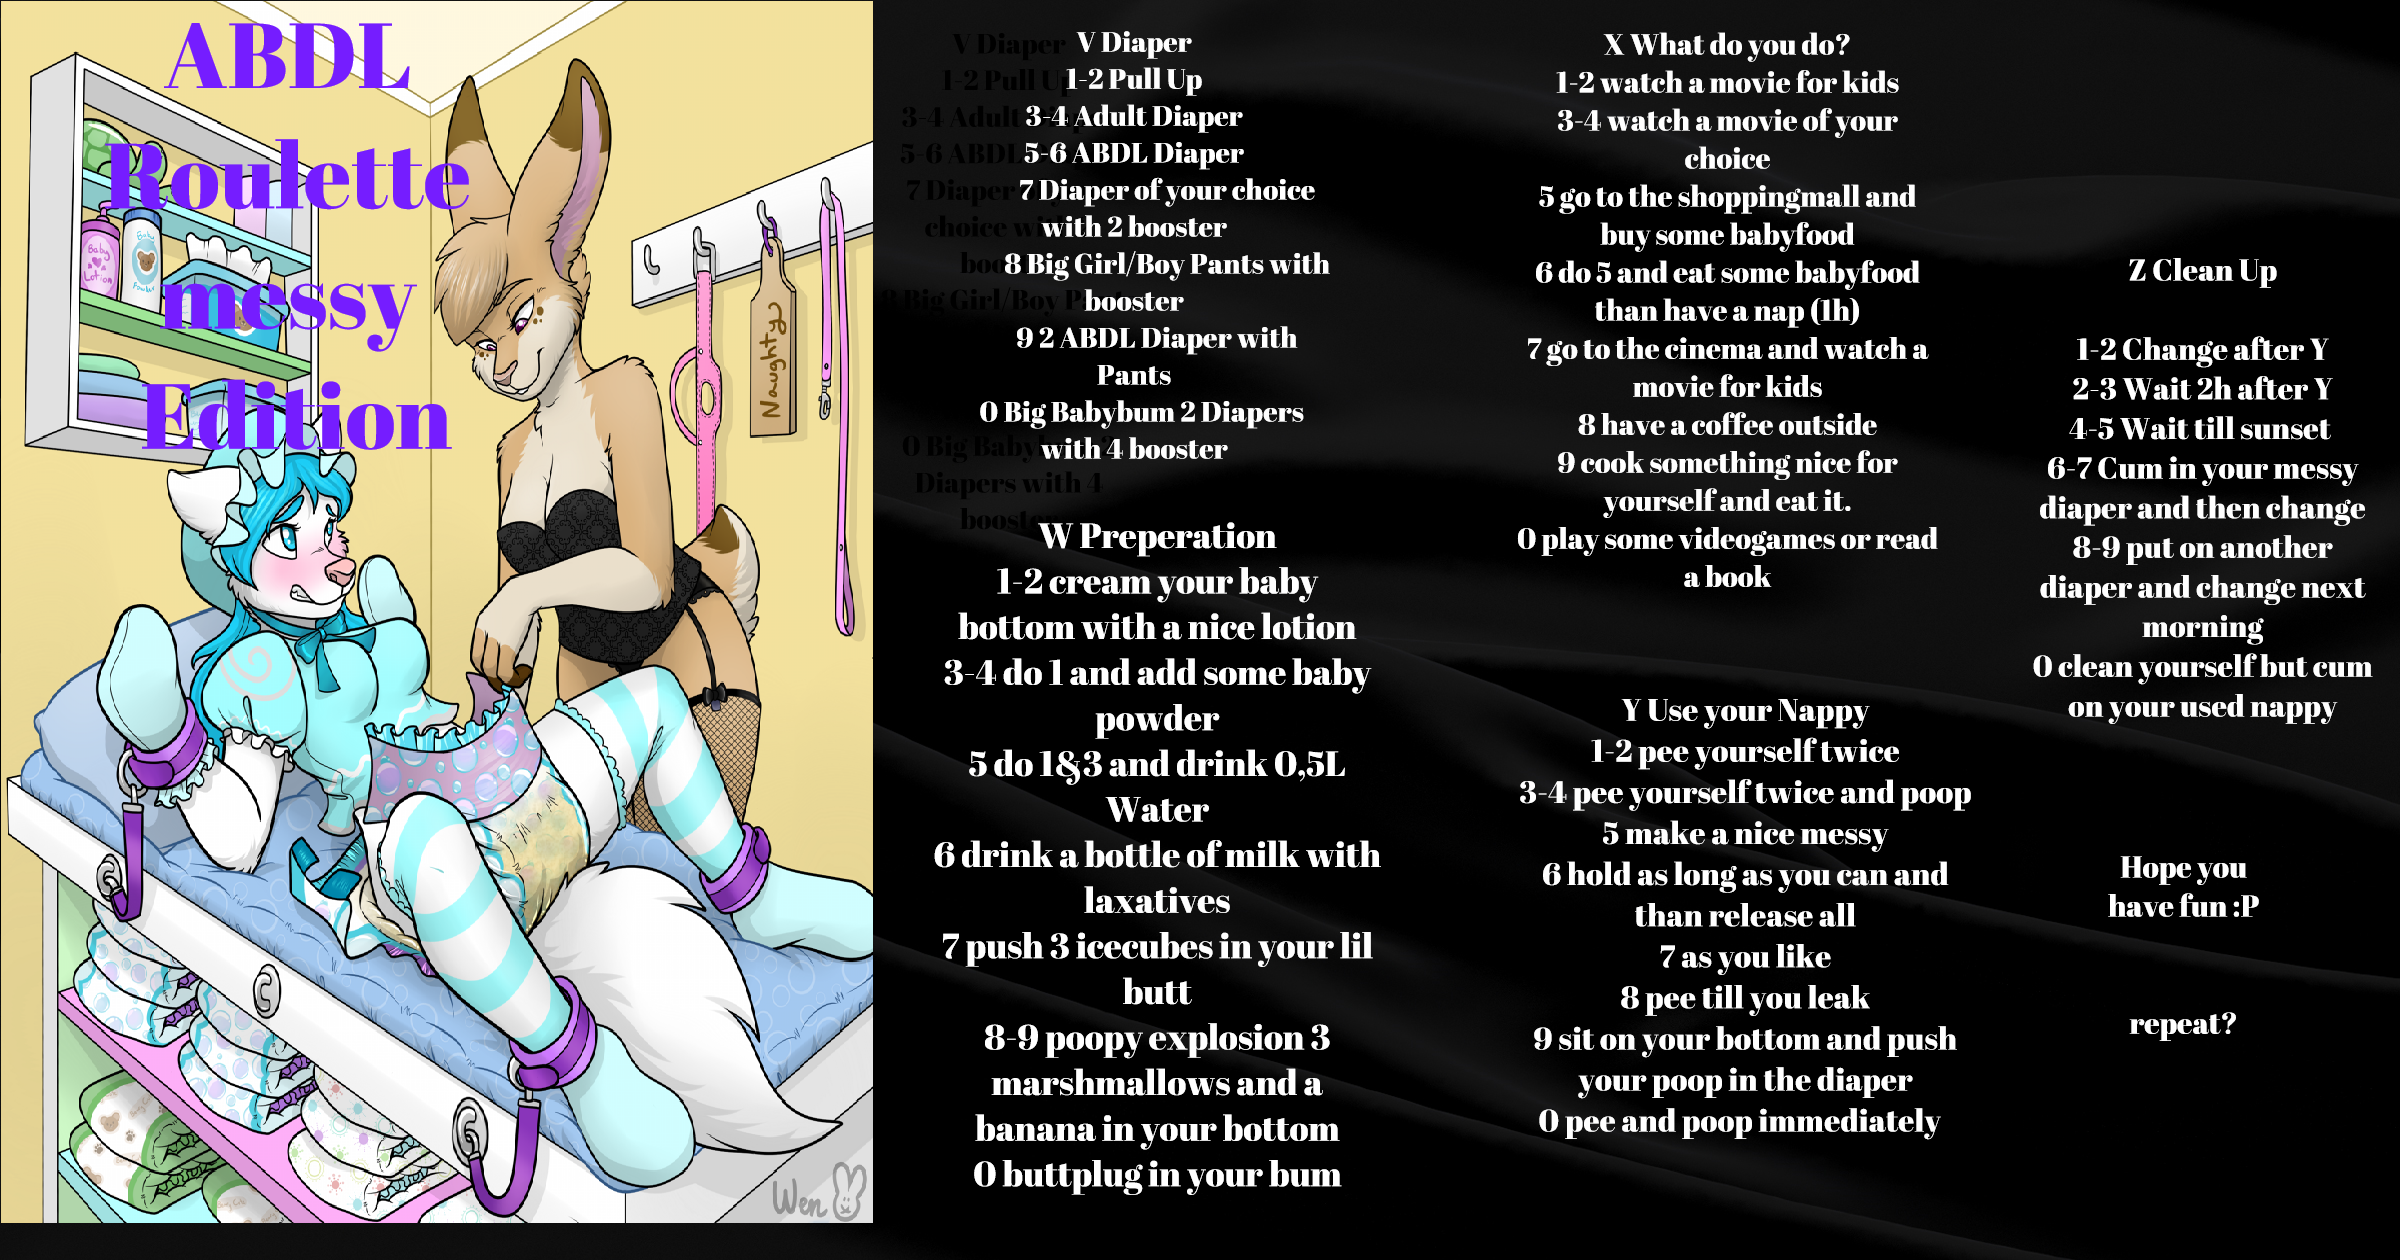 abdl,roulette,messy,edition,sissy,anal,public,diaper,messy,female,hentai,fa...